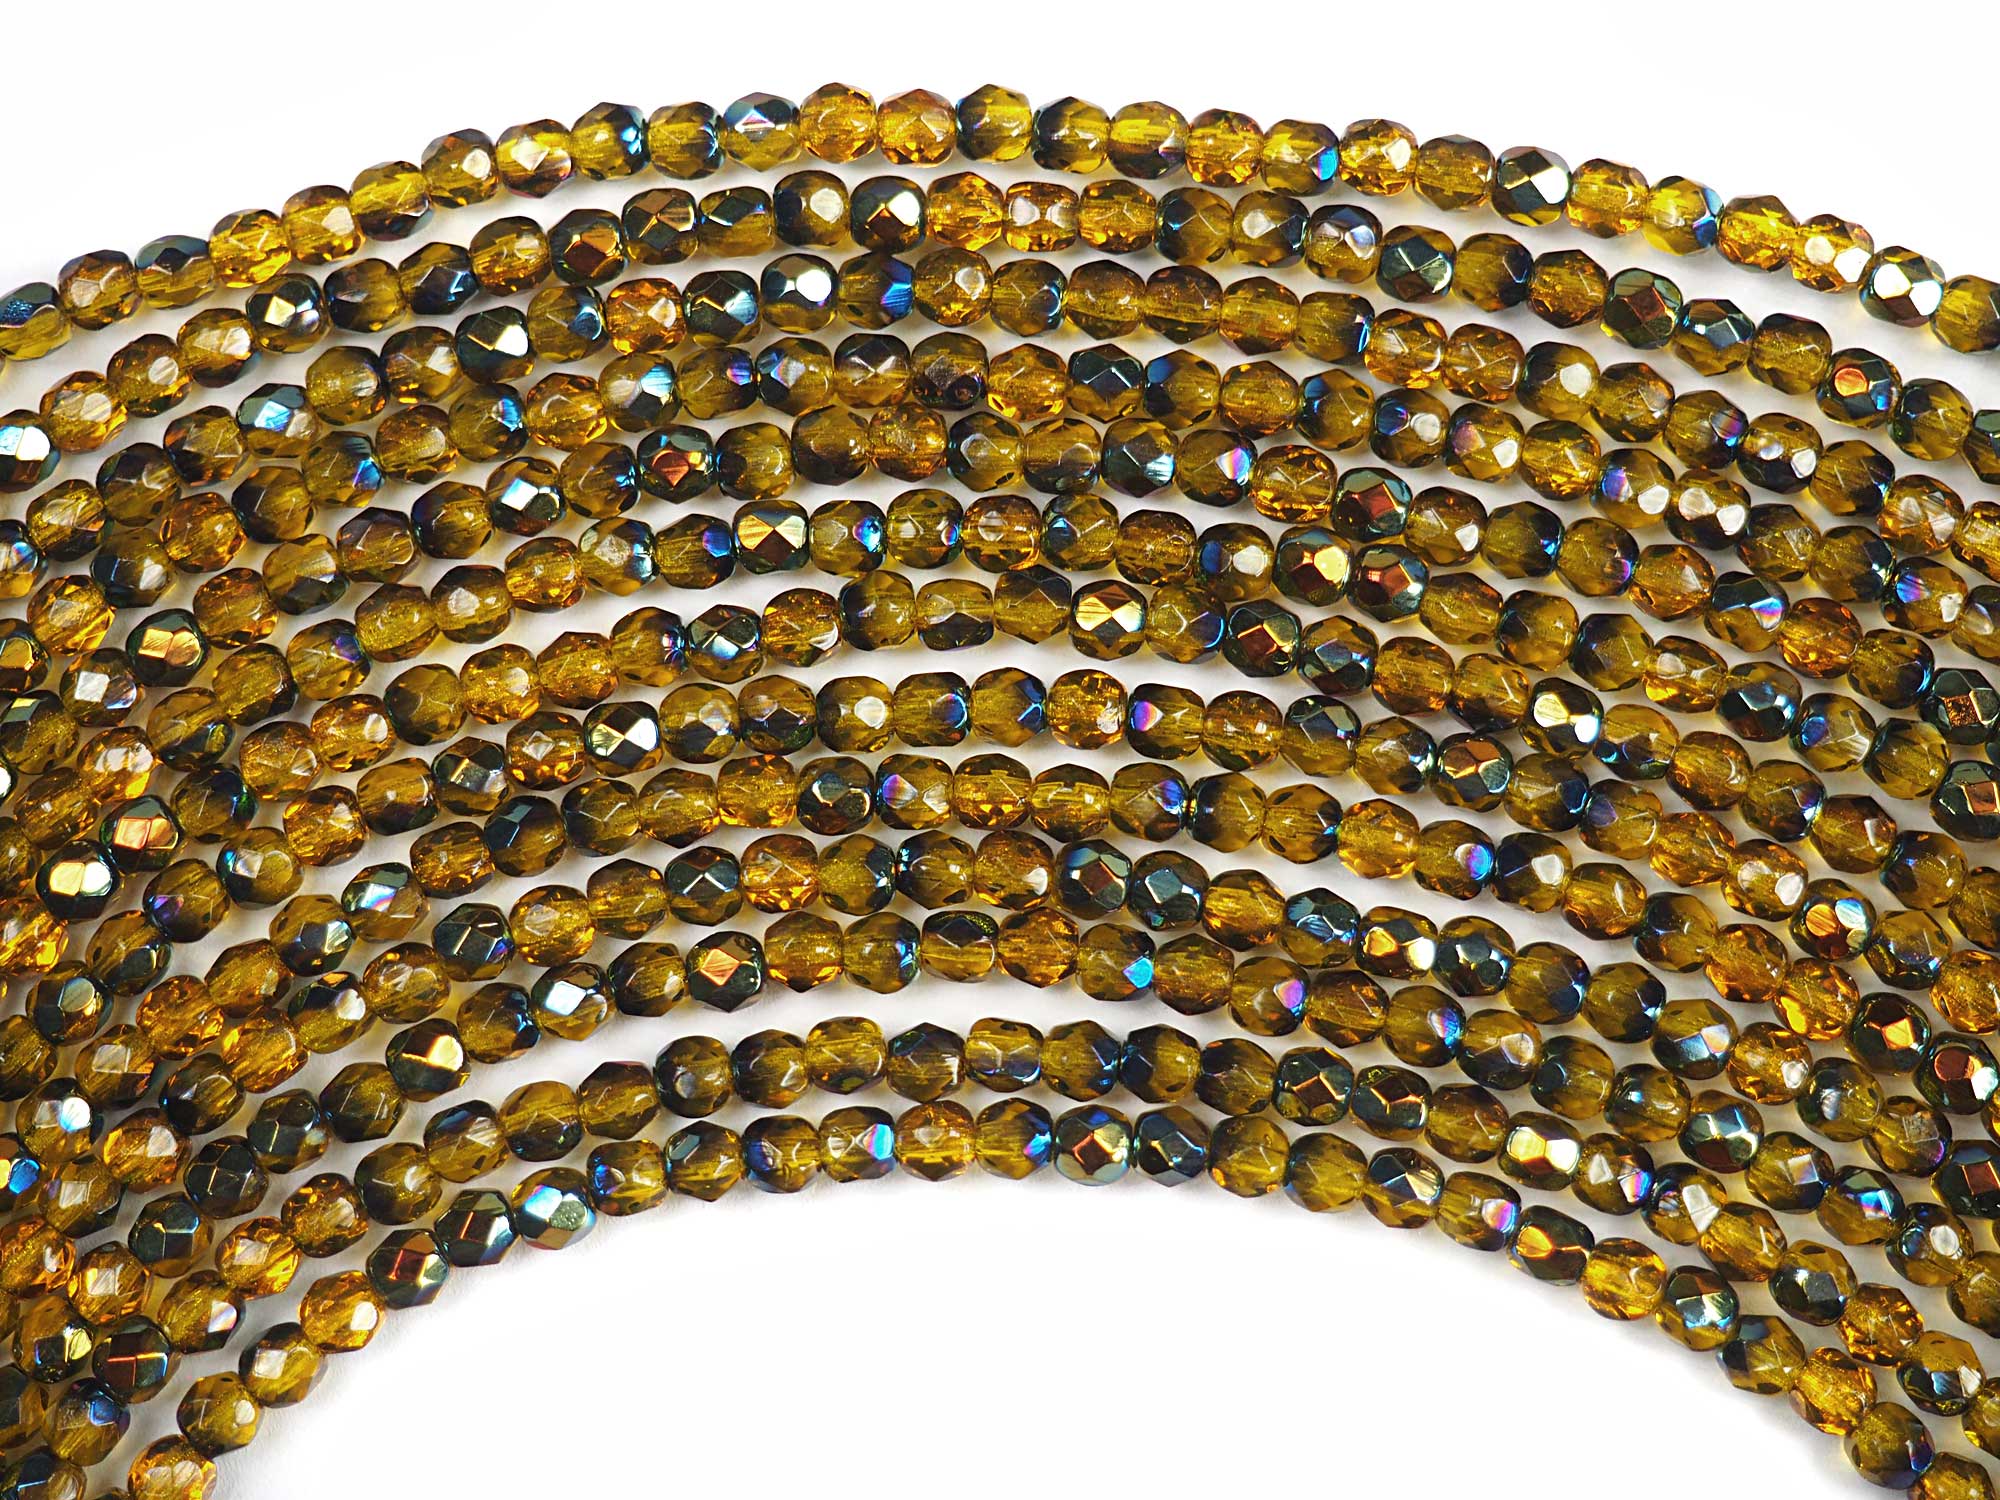 Citrine Santander Heavy coated, Czech Fire Polished Round Faceted Glass Beads, 16 inch strand